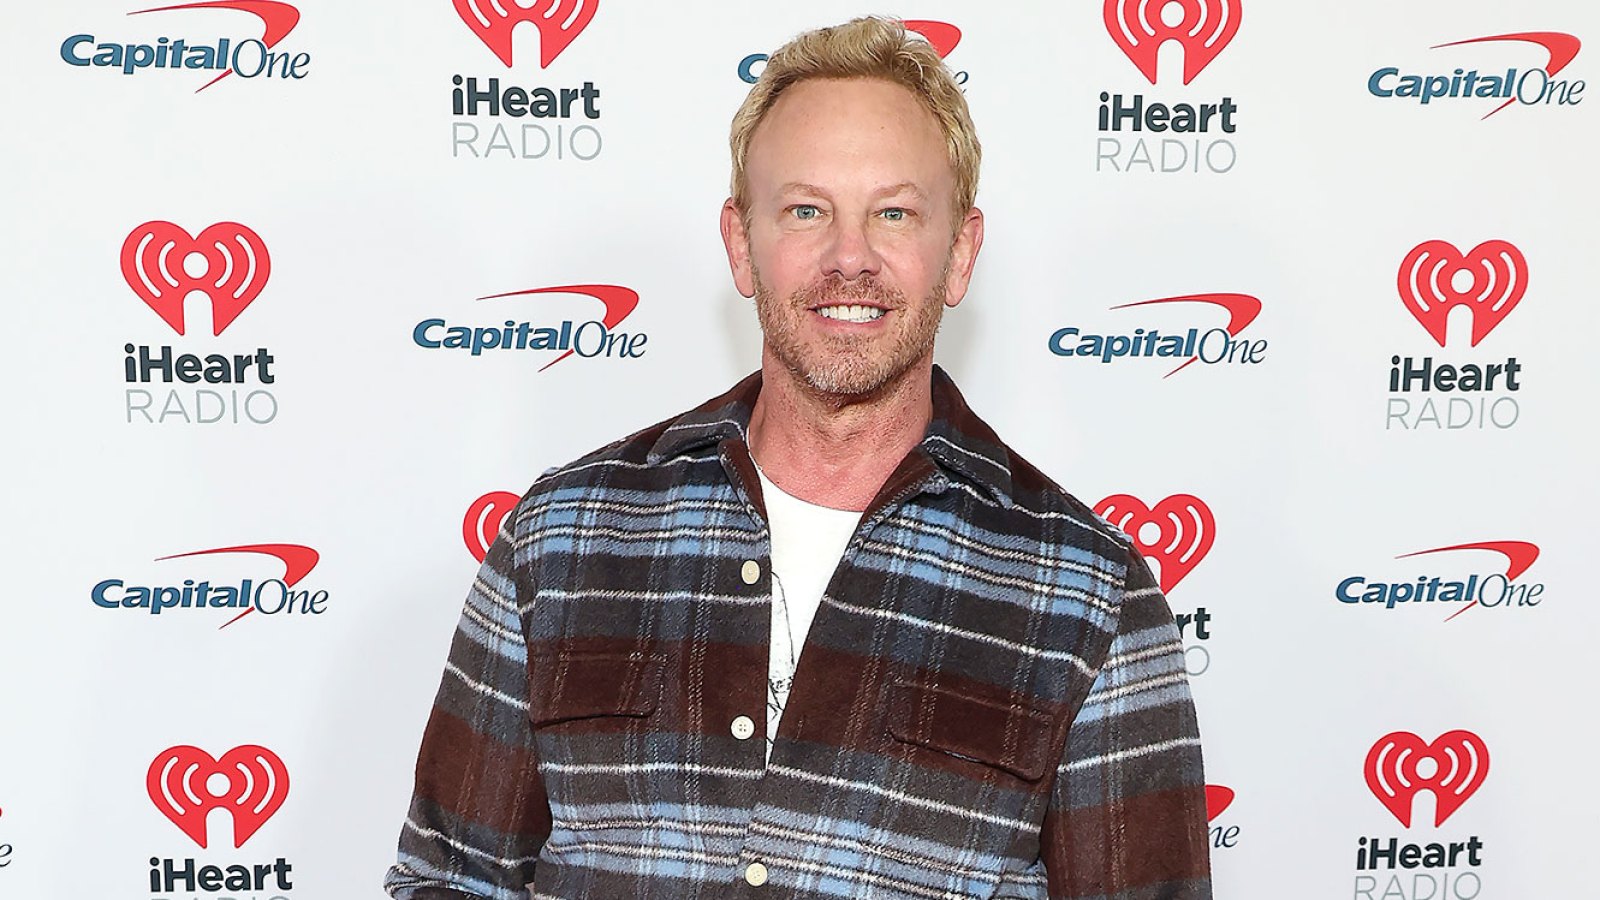 Bike Gang Members Arrested for Attacking Ian Ziering in New Year Eve Brawl